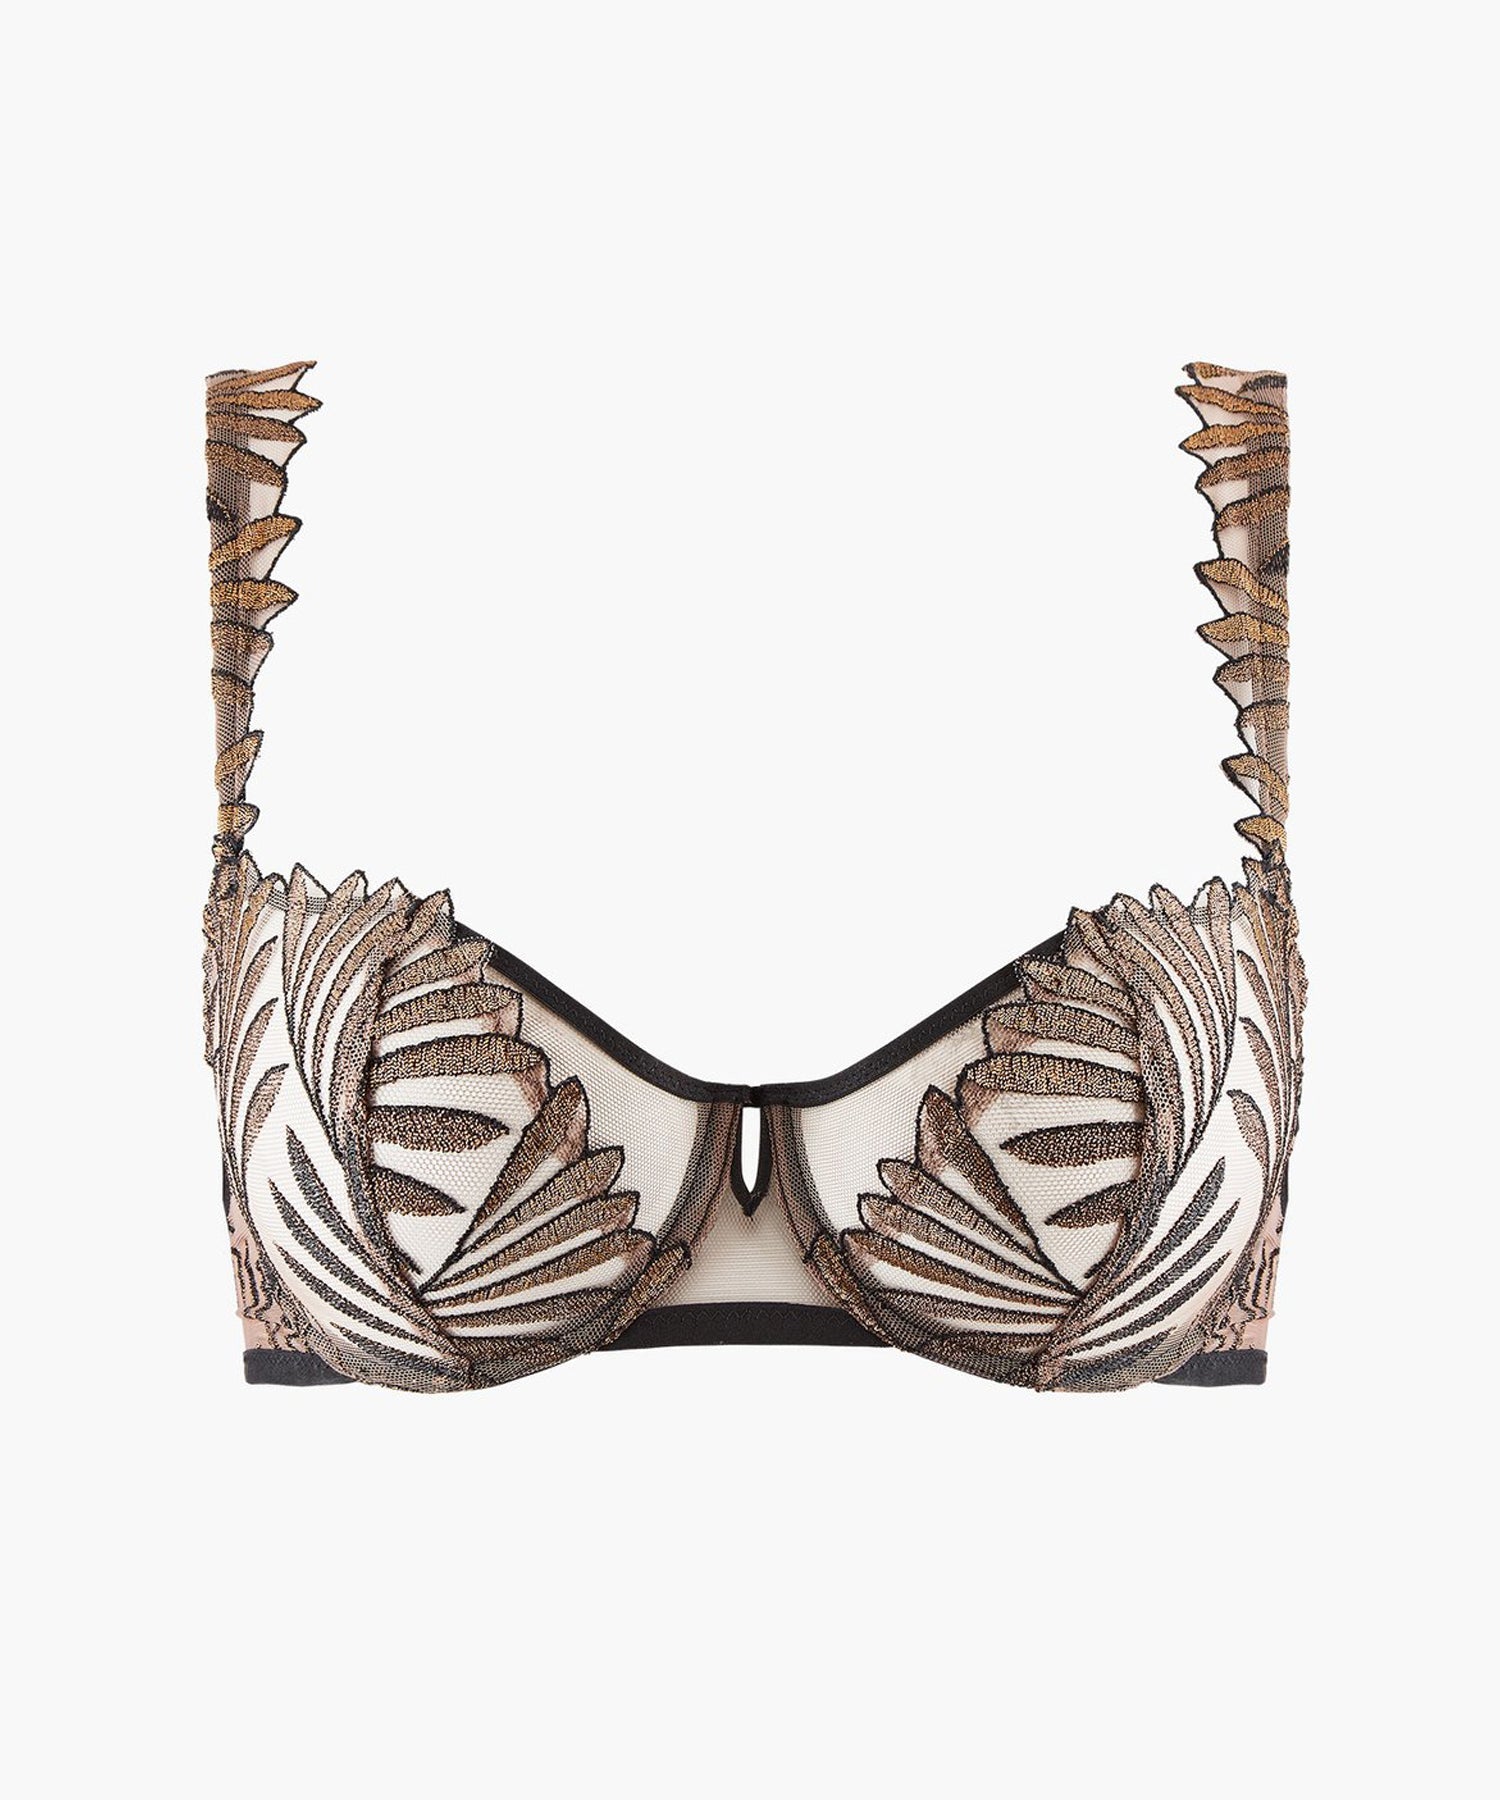 Iris van Herpen Teams Up With French Lingerie Brand Aubade for Capsule